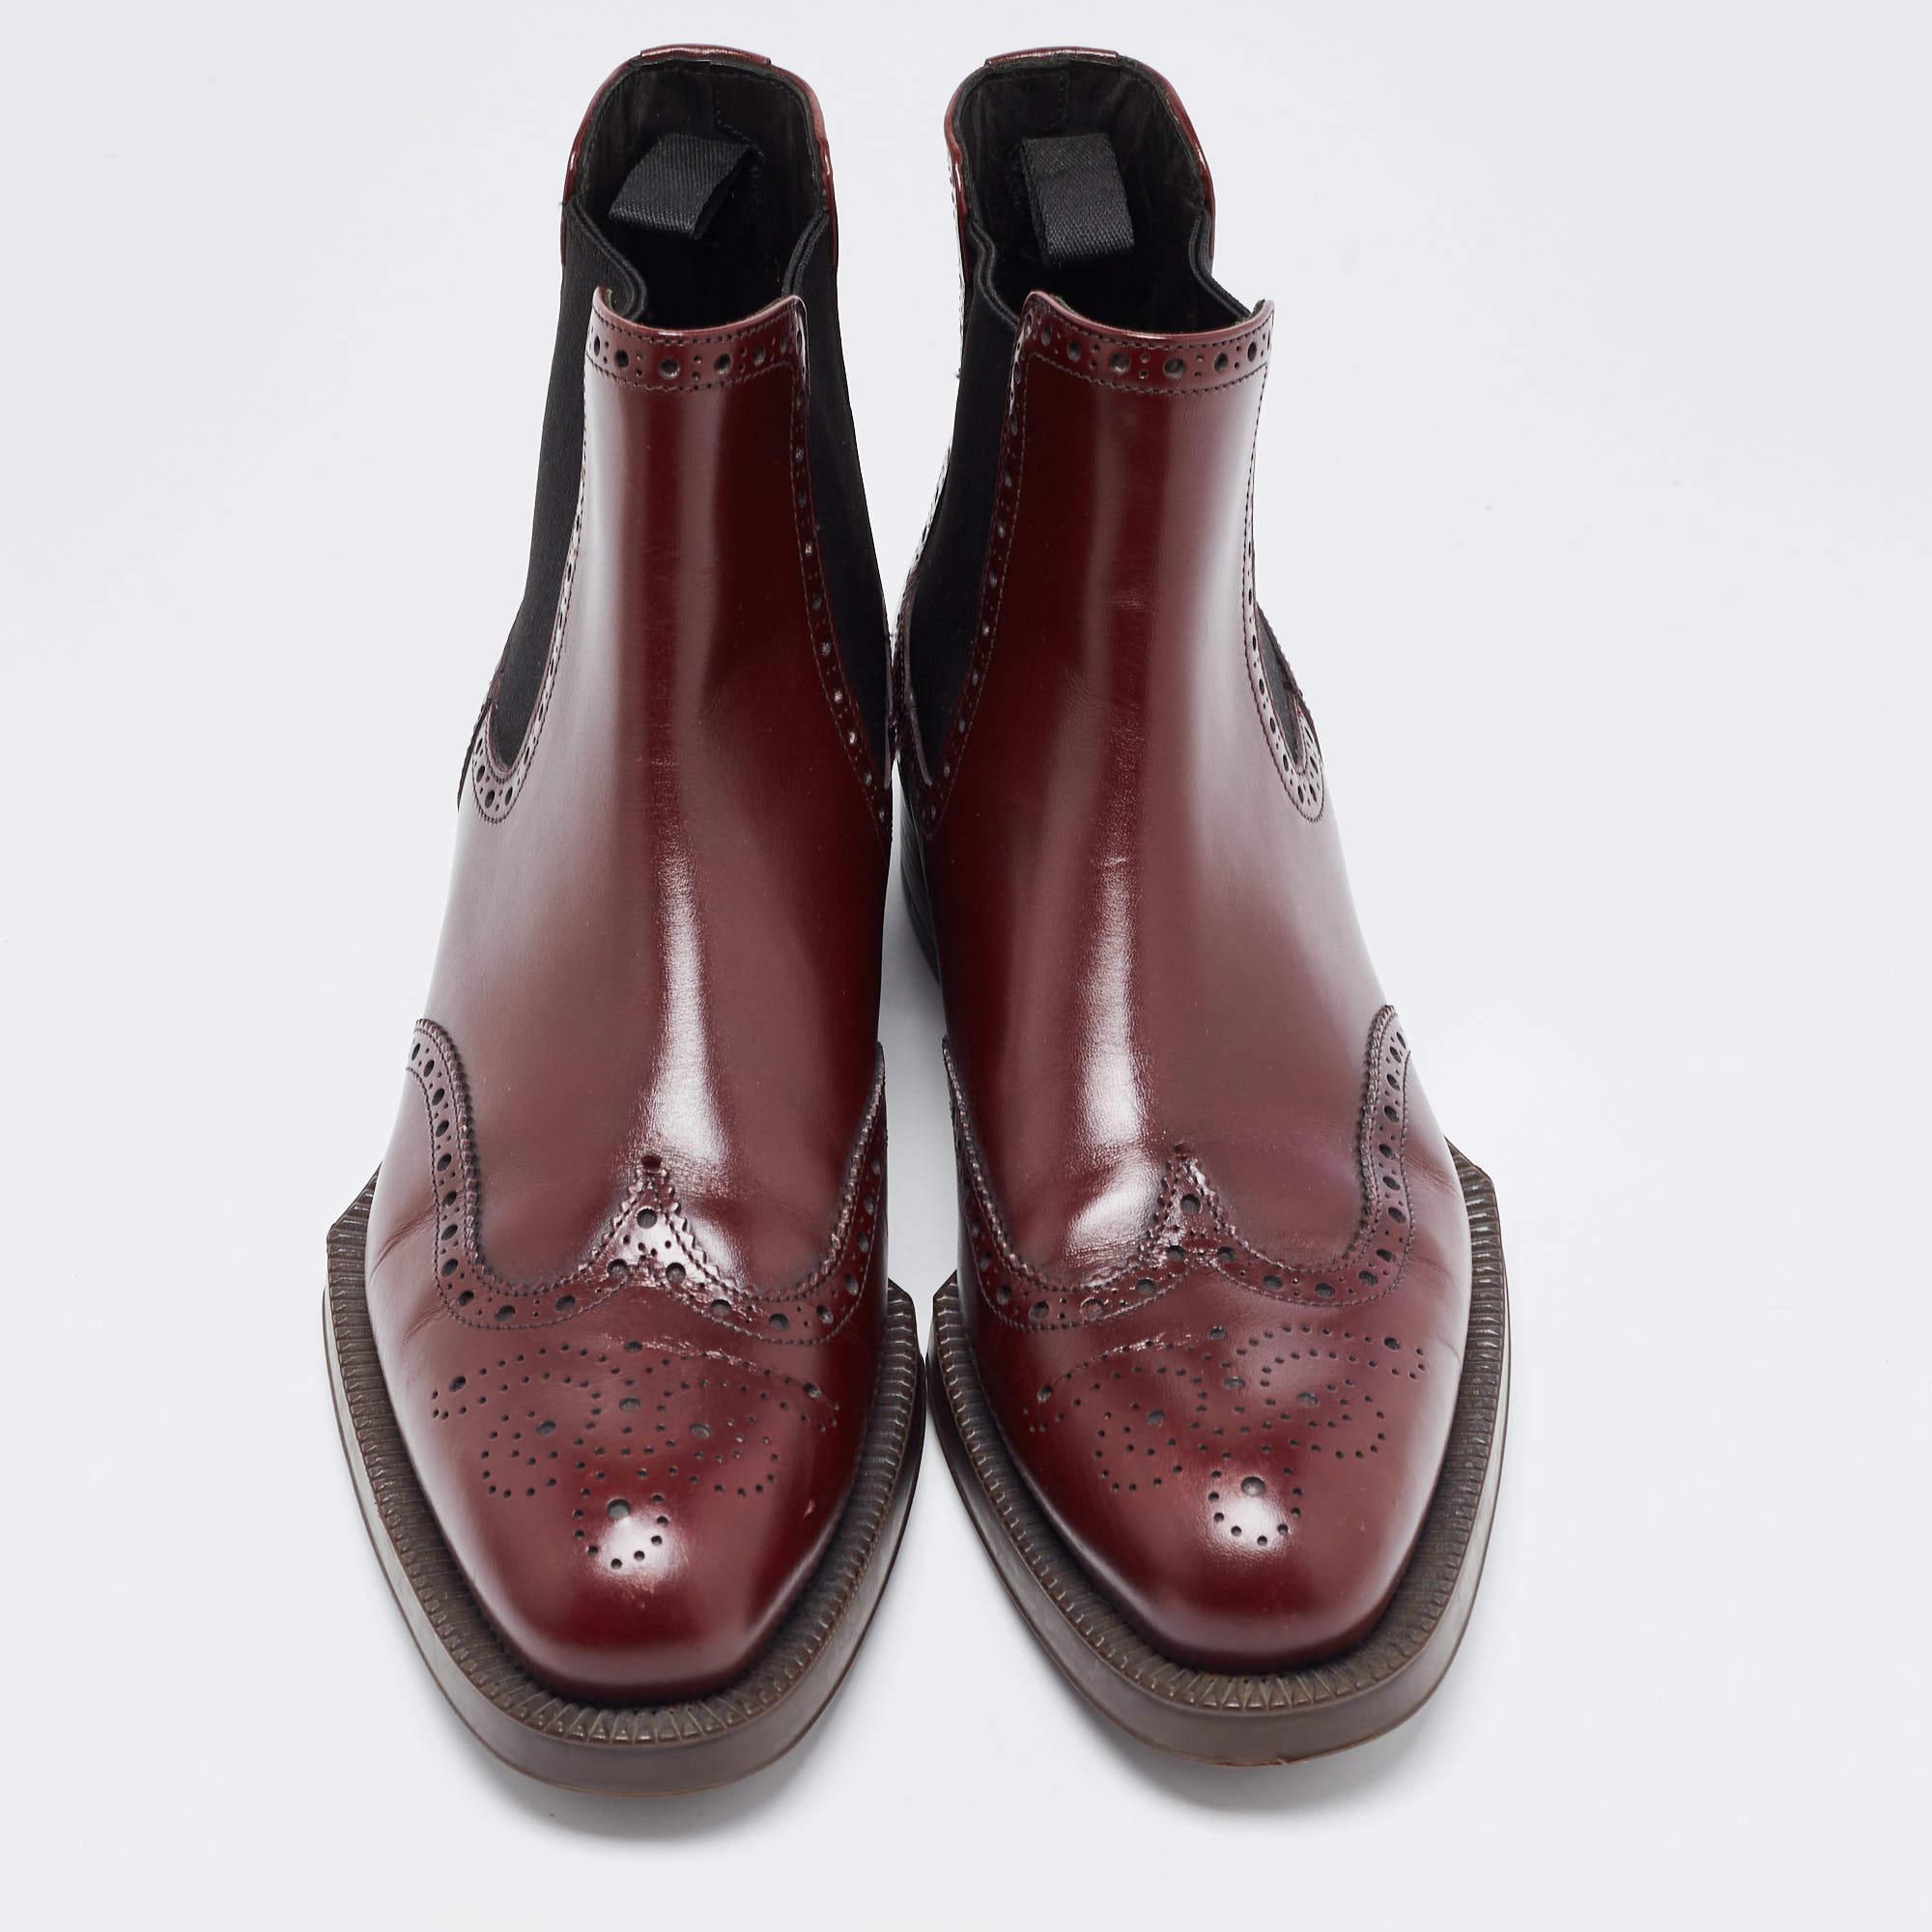 Elevate your style with these Prada burgundy boots for women. Crafted with precision, these leather ankle boots seamlessly blend fashion and comfort, offering sophistication for every season.

